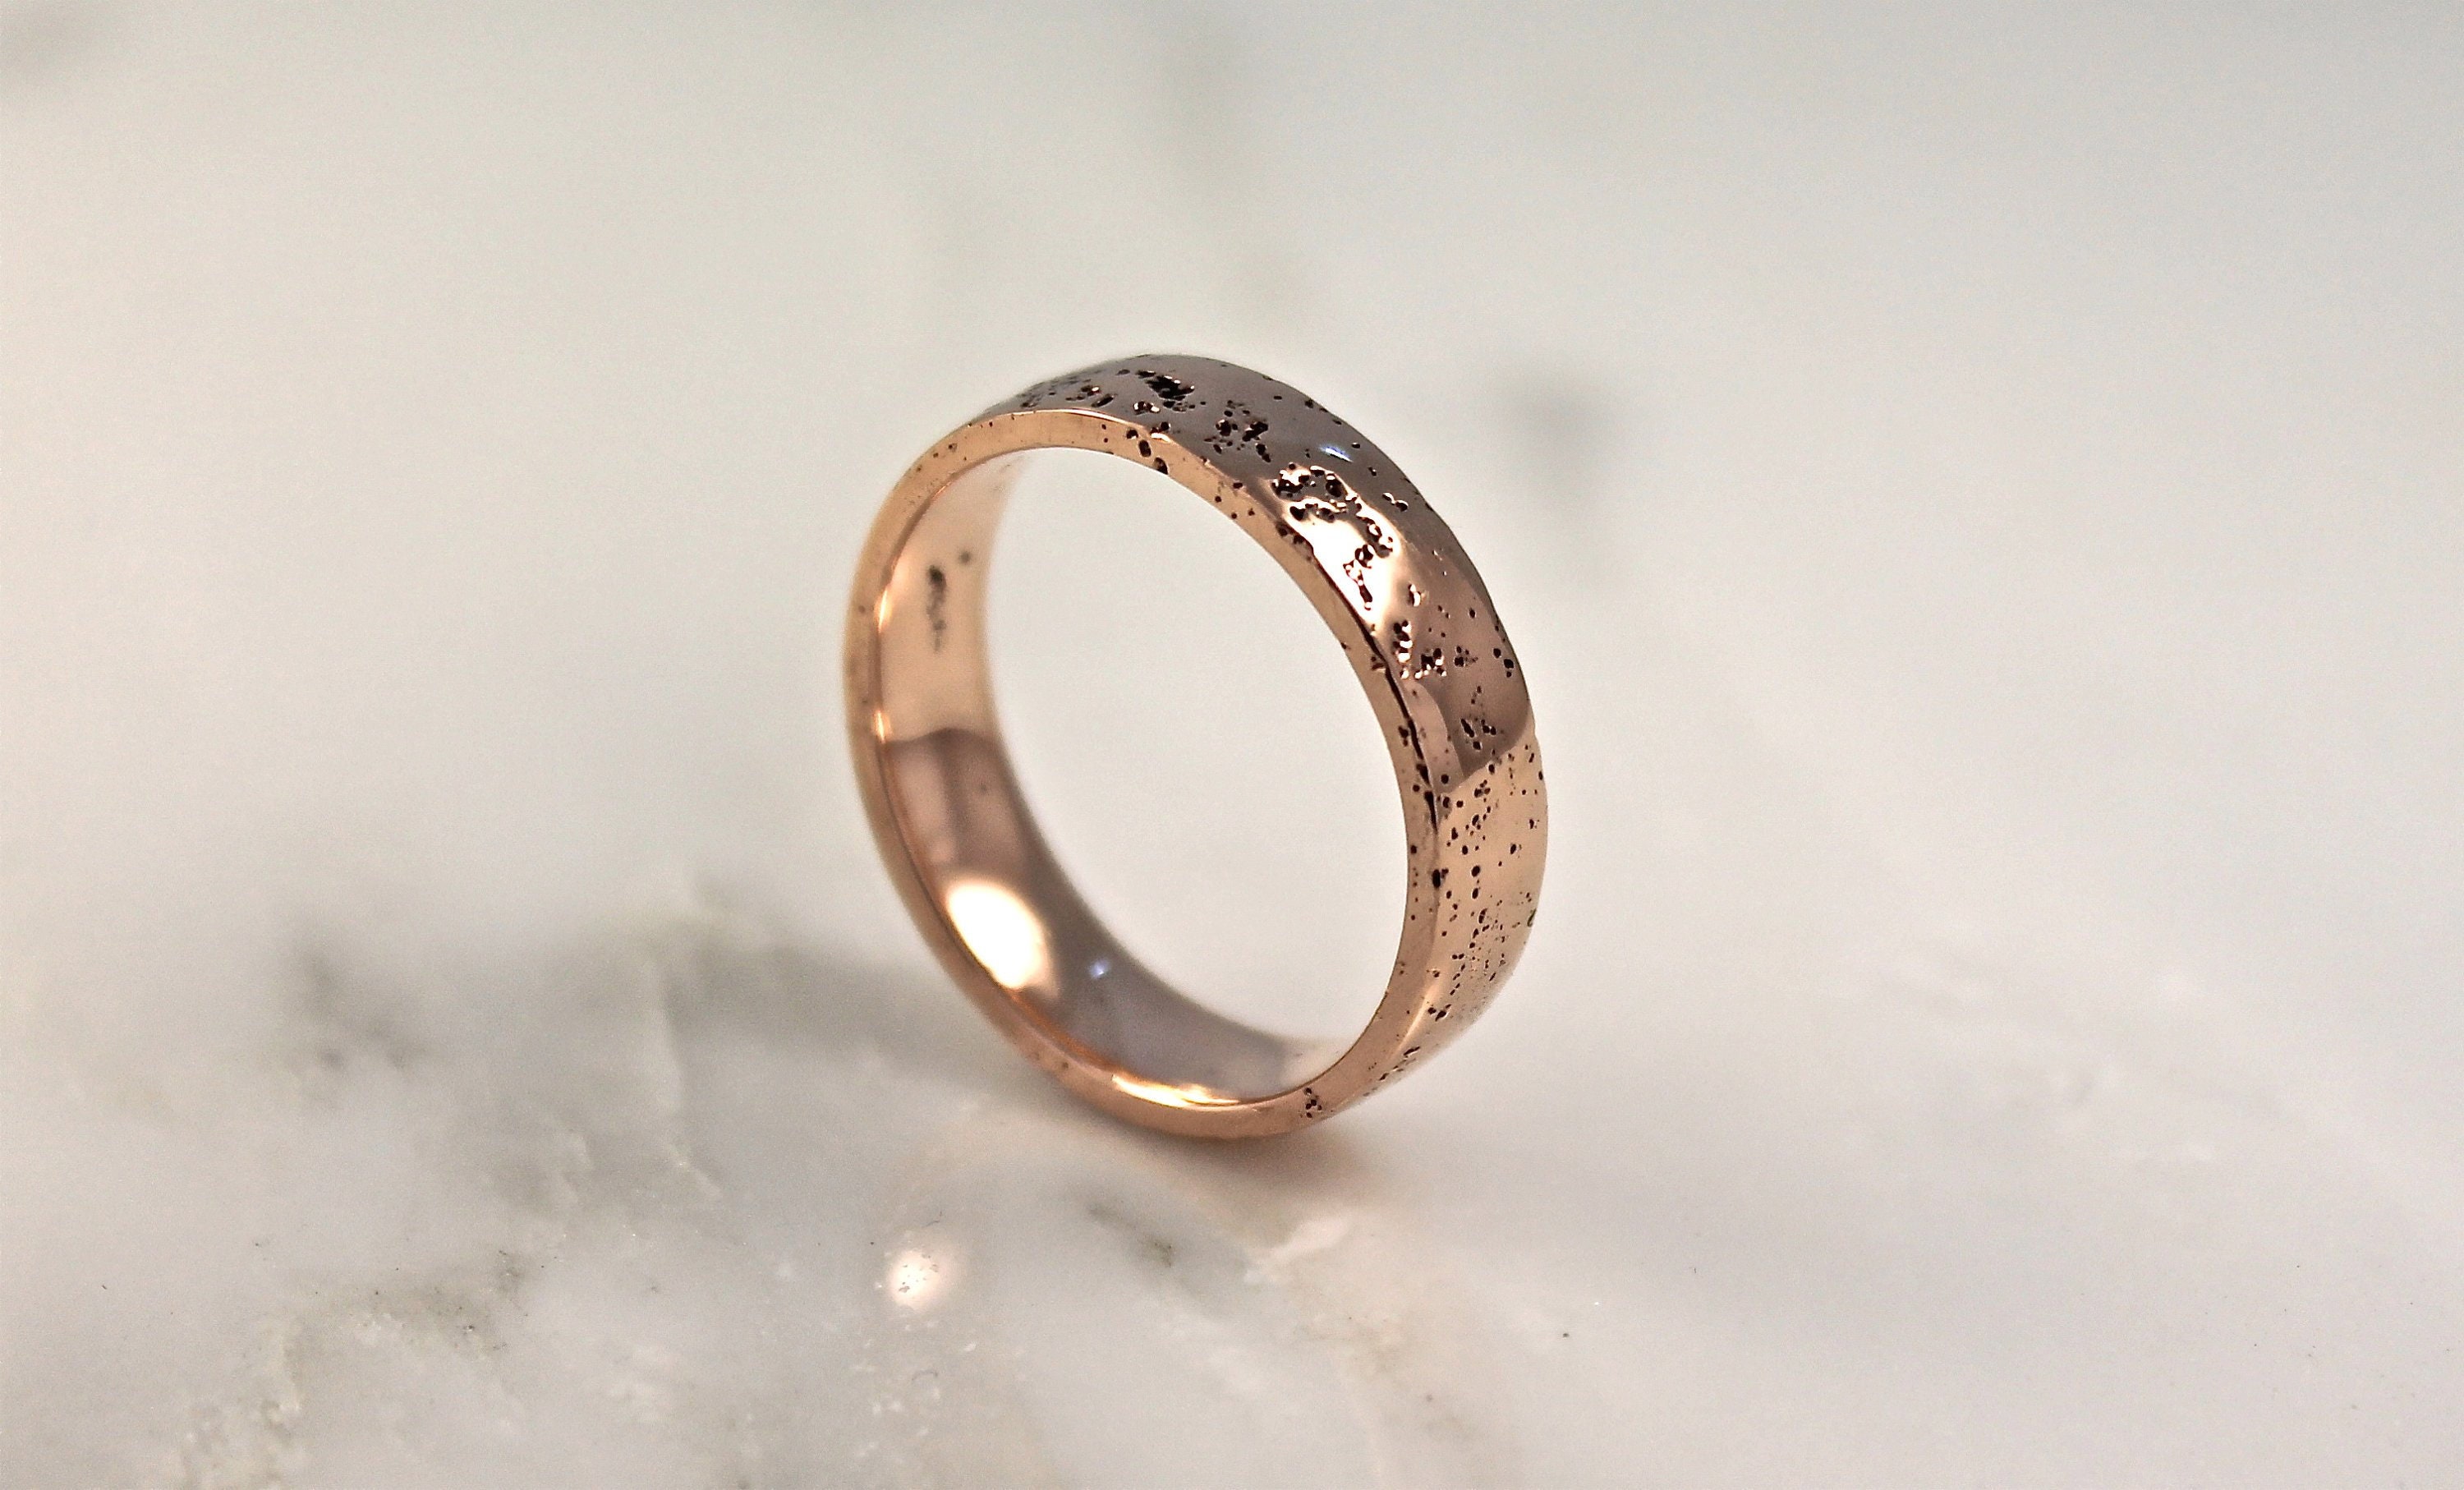 Textured Rose Gold Ring, Rustic Wedding Band, Sandcast 9Ct Simple Hand Forged By Woodengold